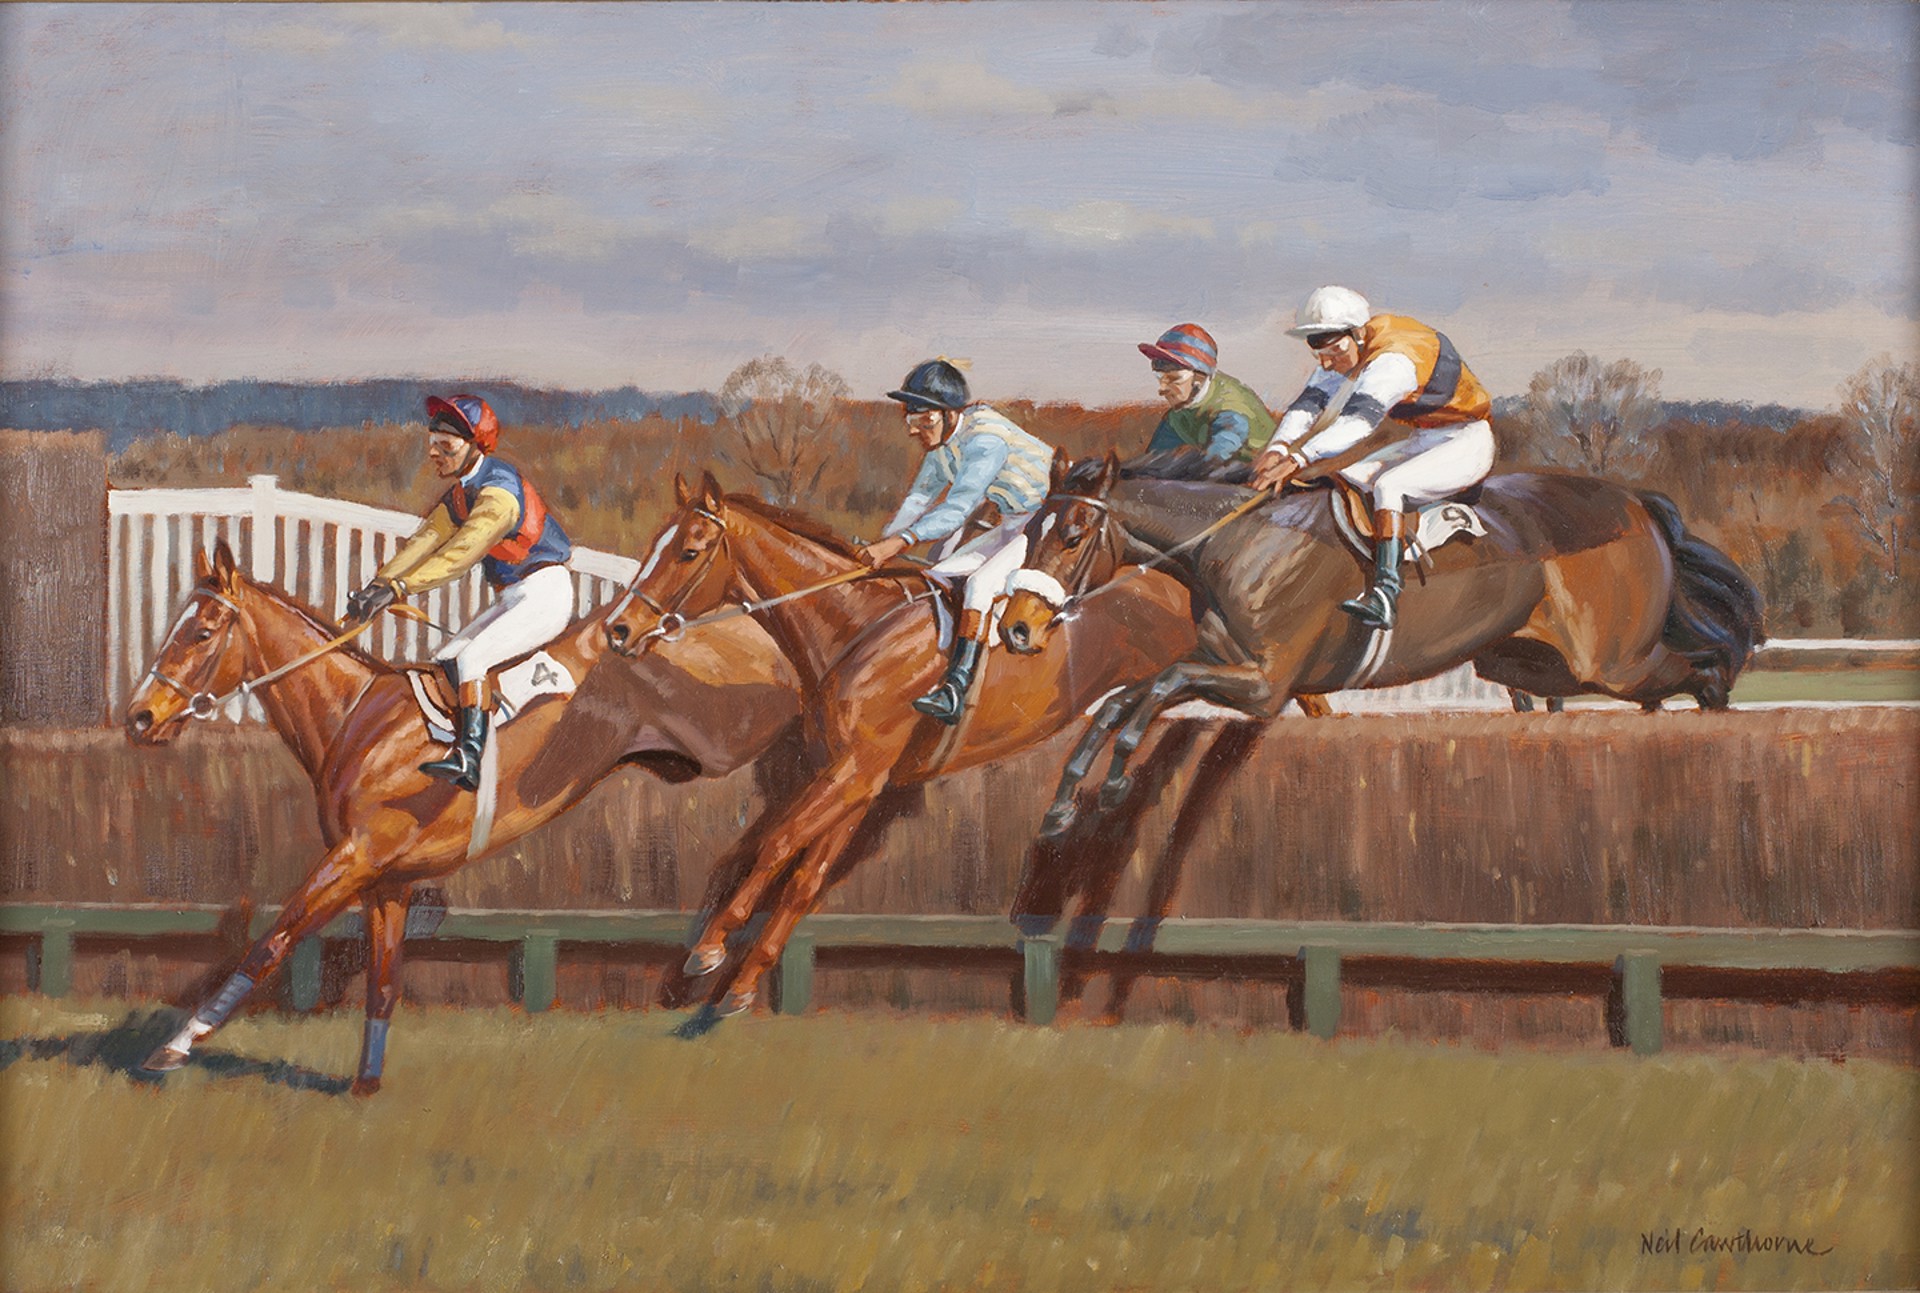 Three Fences from Home-Ascot by Neil Cawthorne